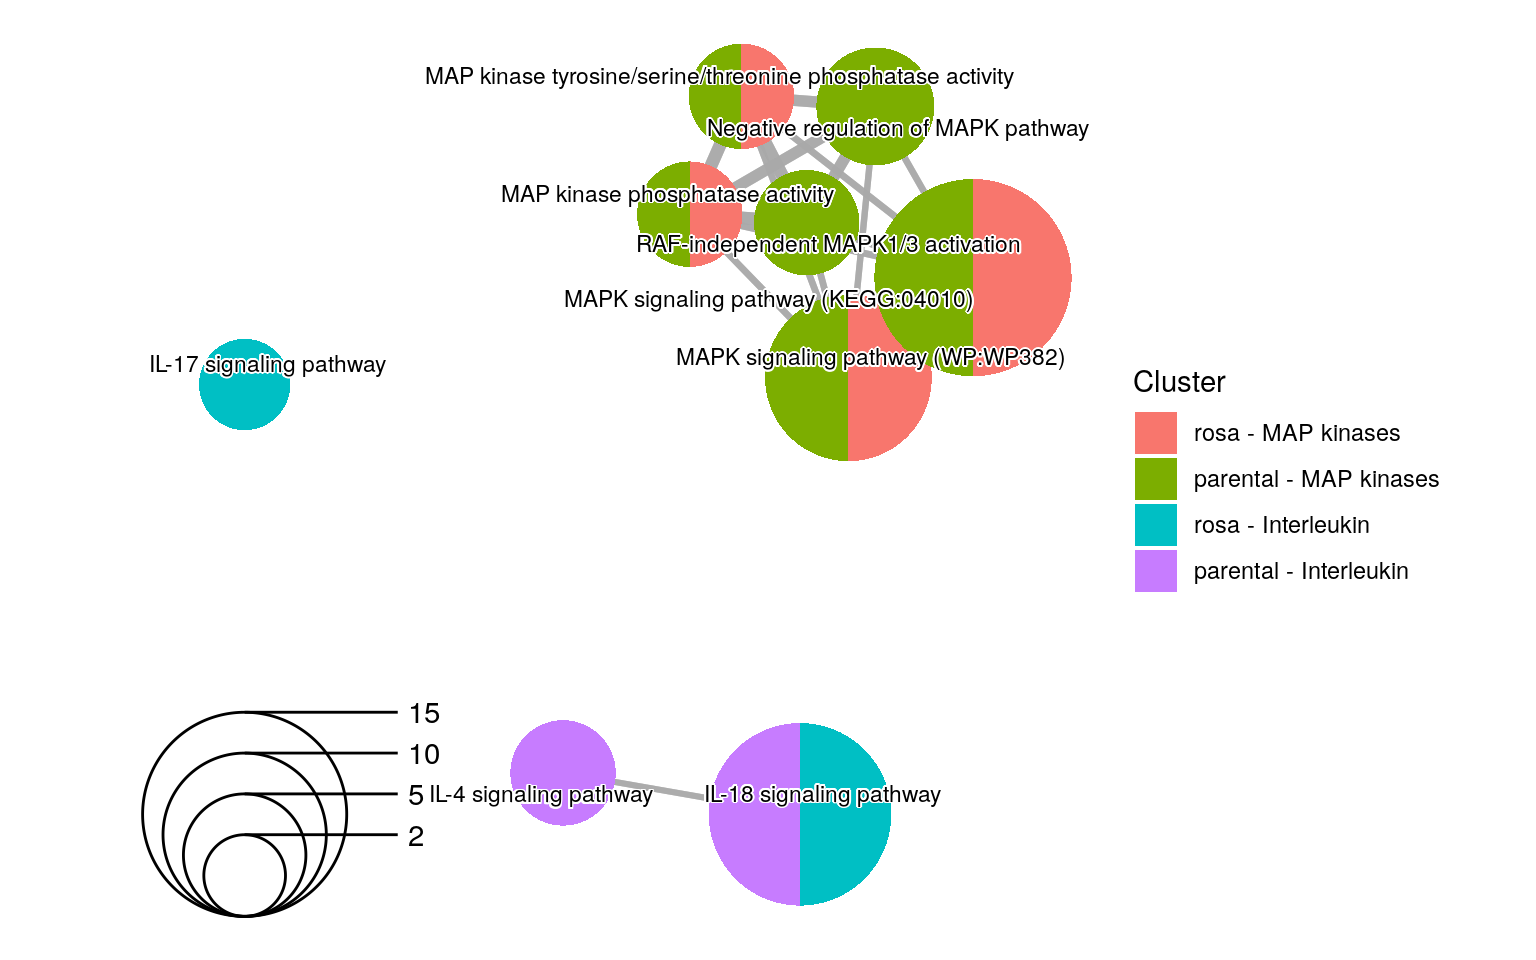 An enrichment map using selected terms related to MAP kinases and interleukin in two different experiments.